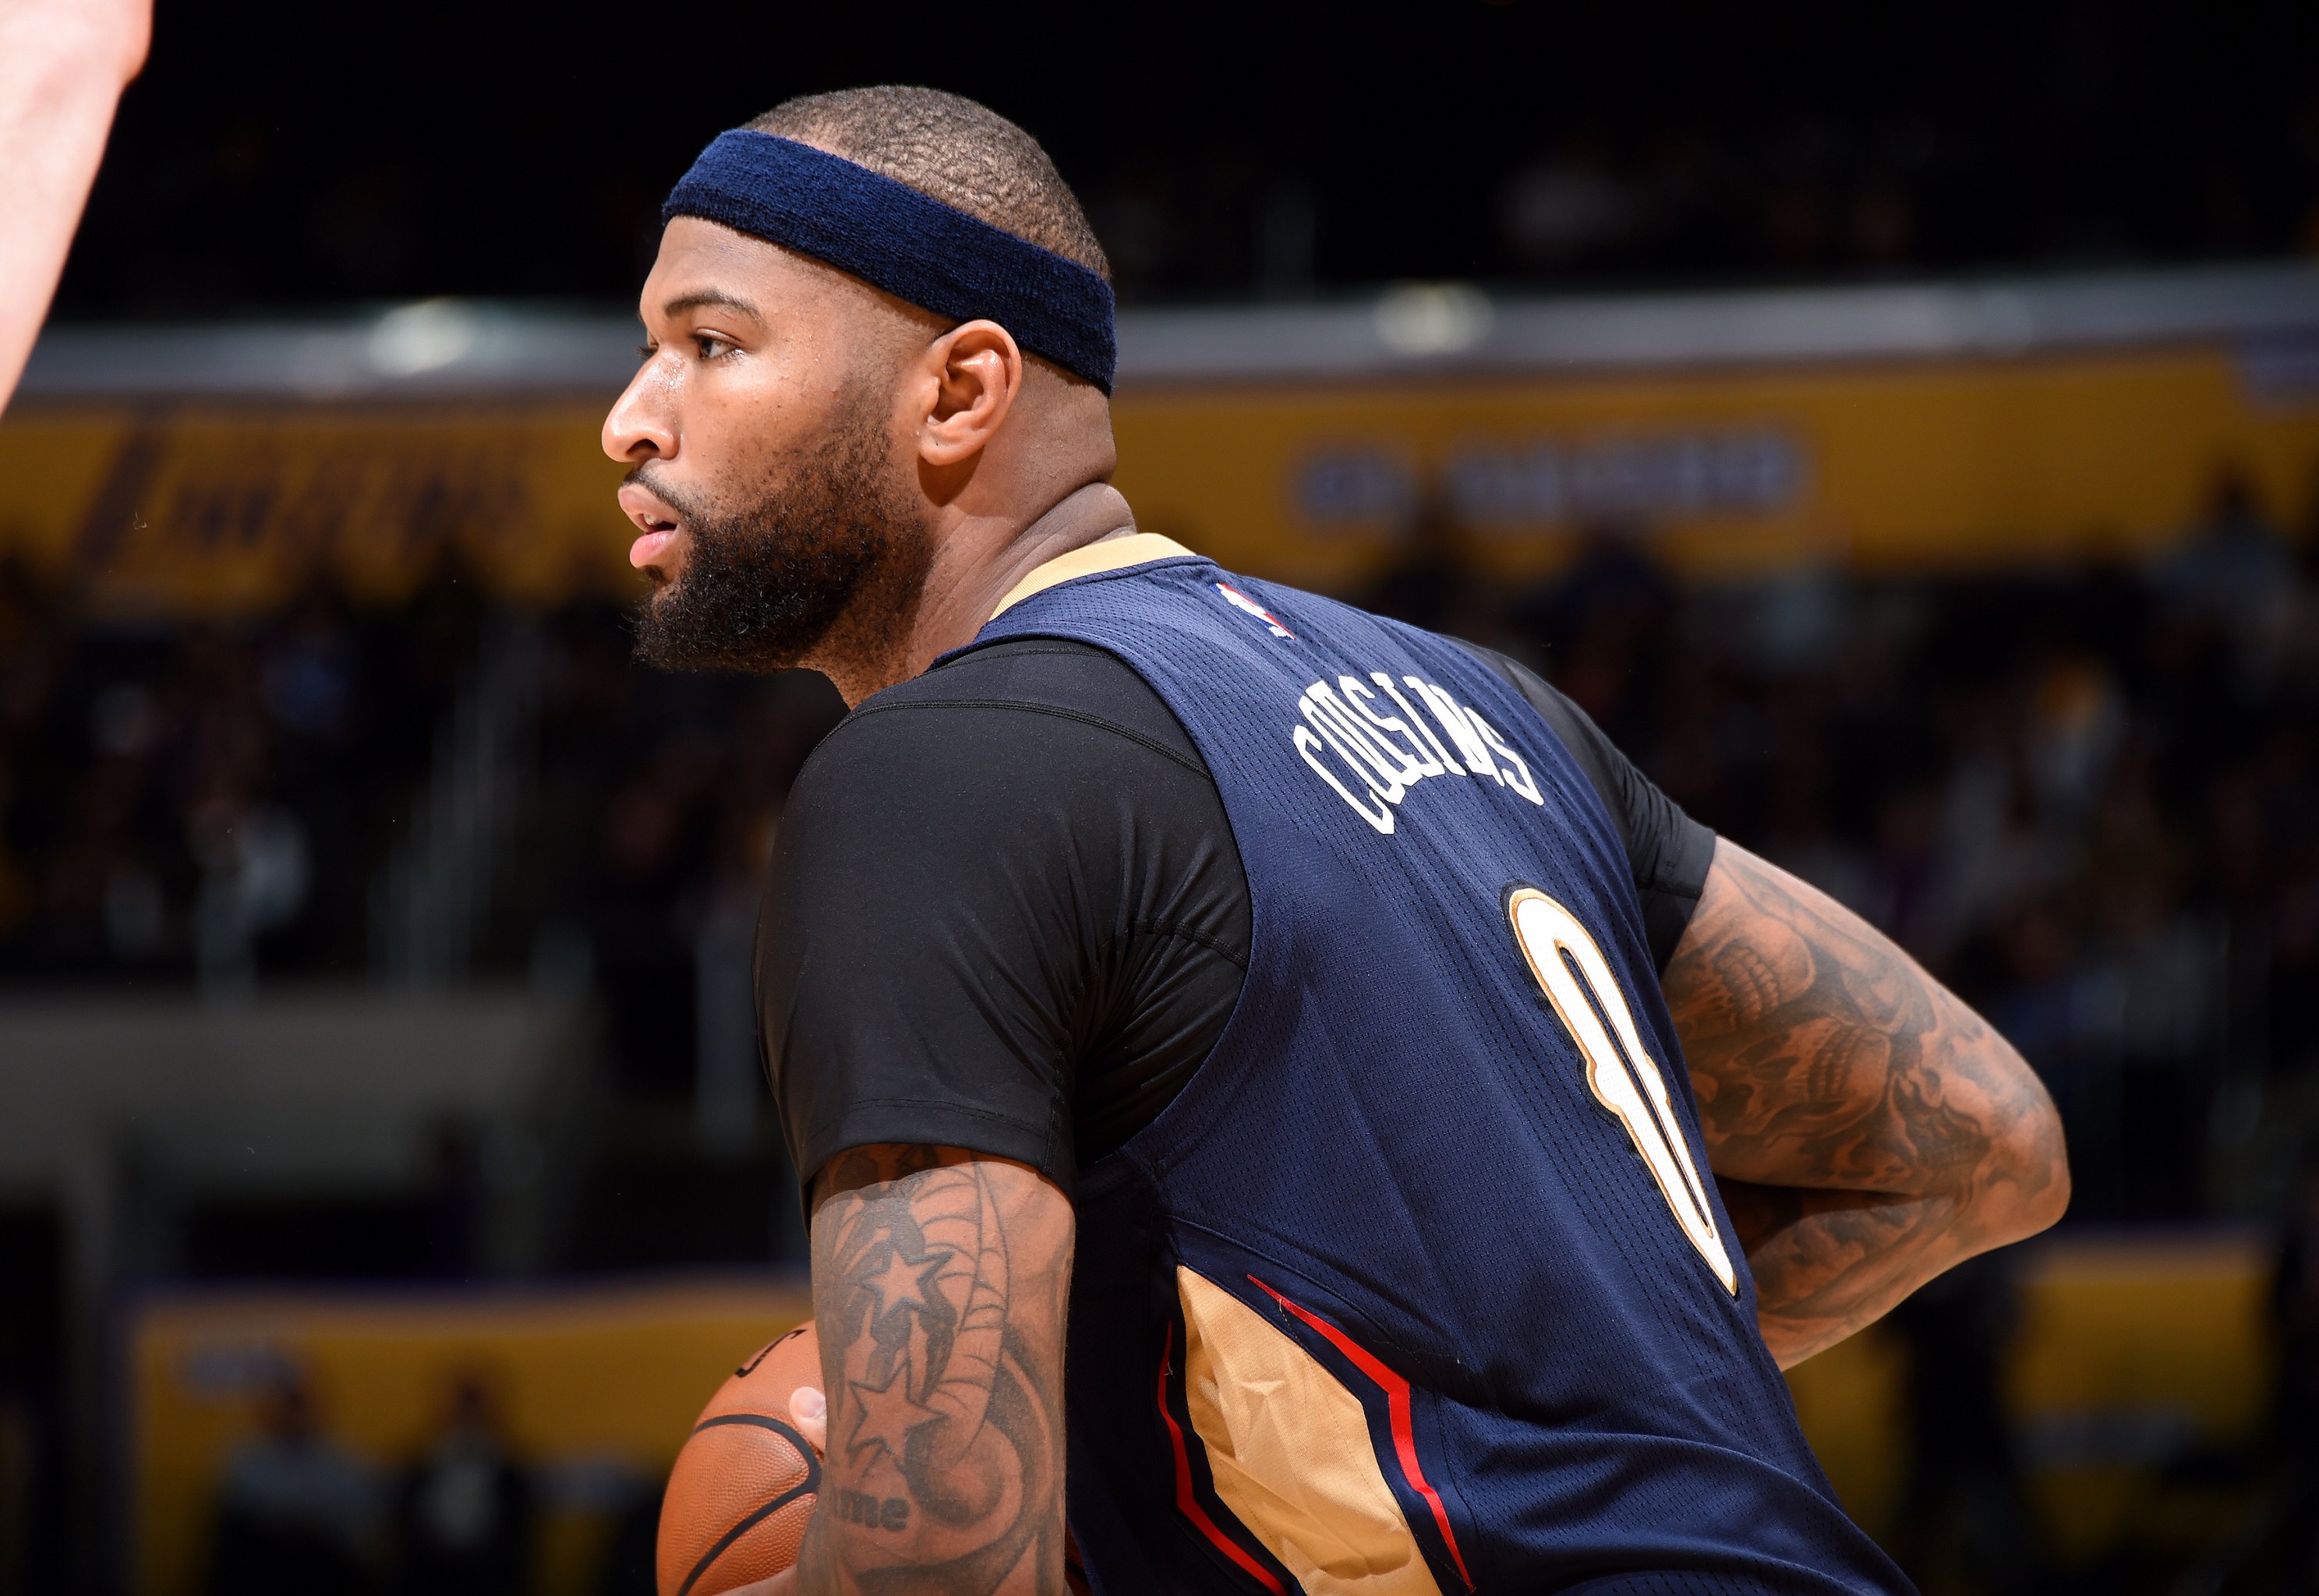 DeMarcus Cousins says his jersey will hang in the rafters when he